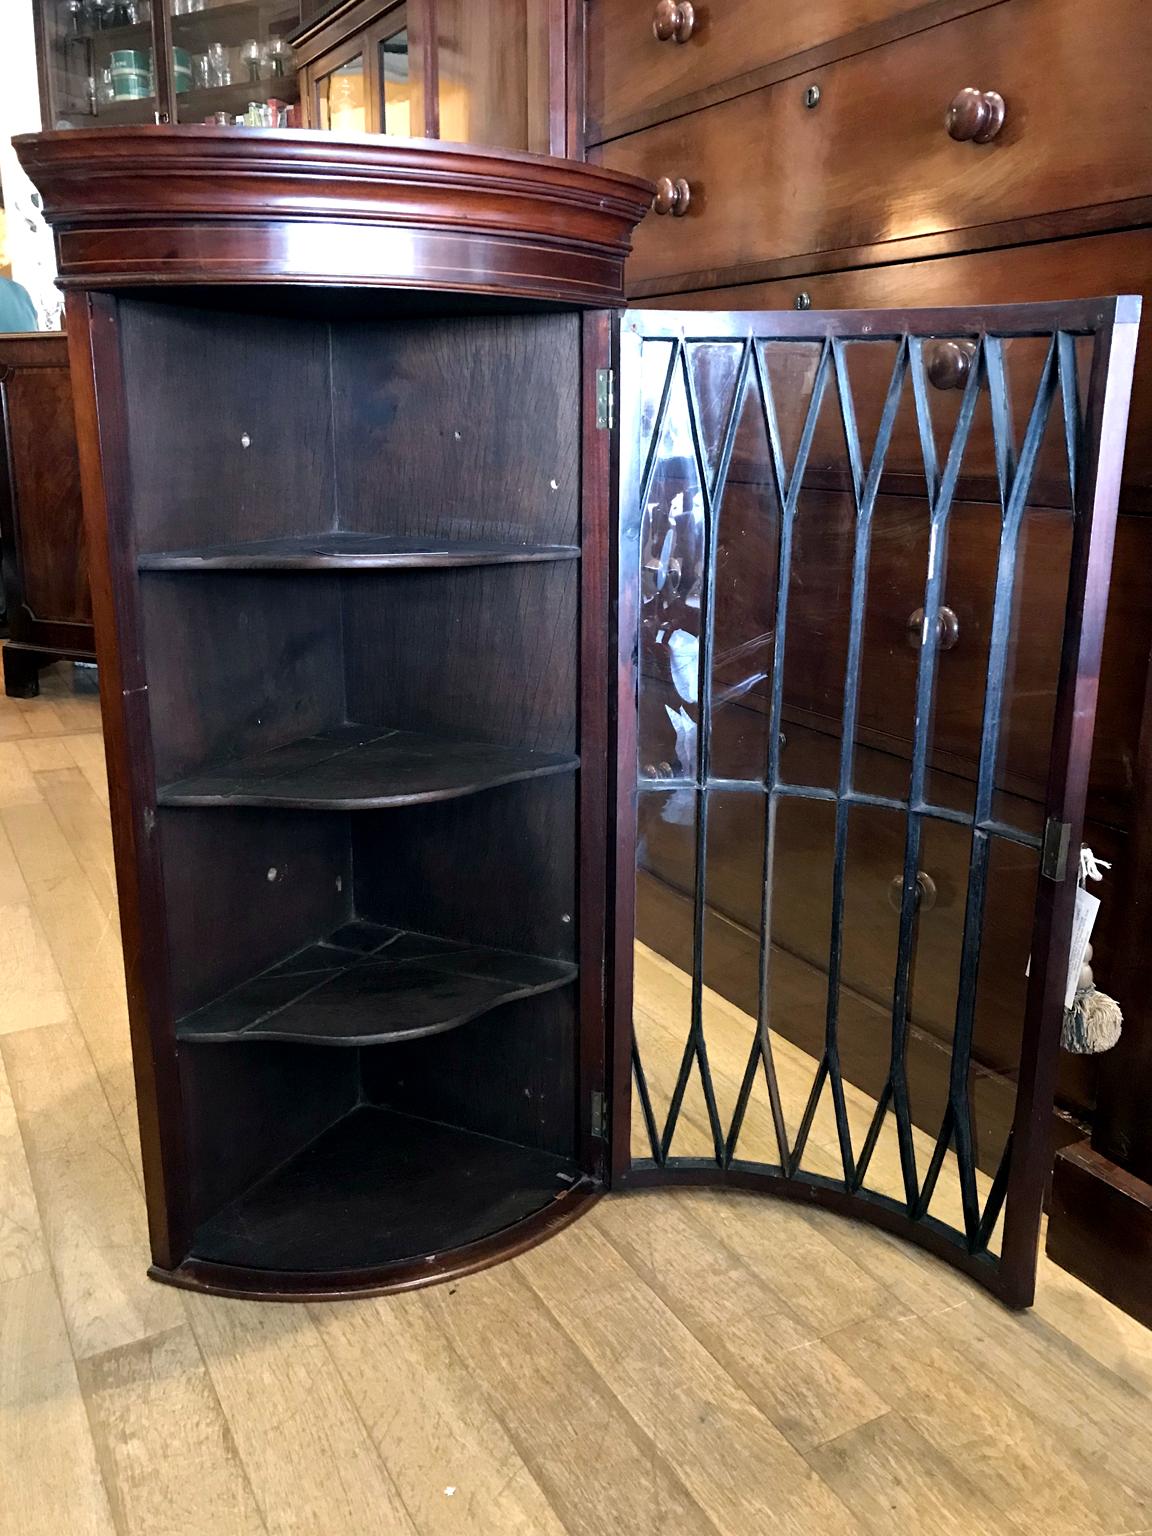 Edwardian Mahogany Inlaid Bow Hanging Corner Cupboard In Good Condition For Sale In Richmond, London, Surrey